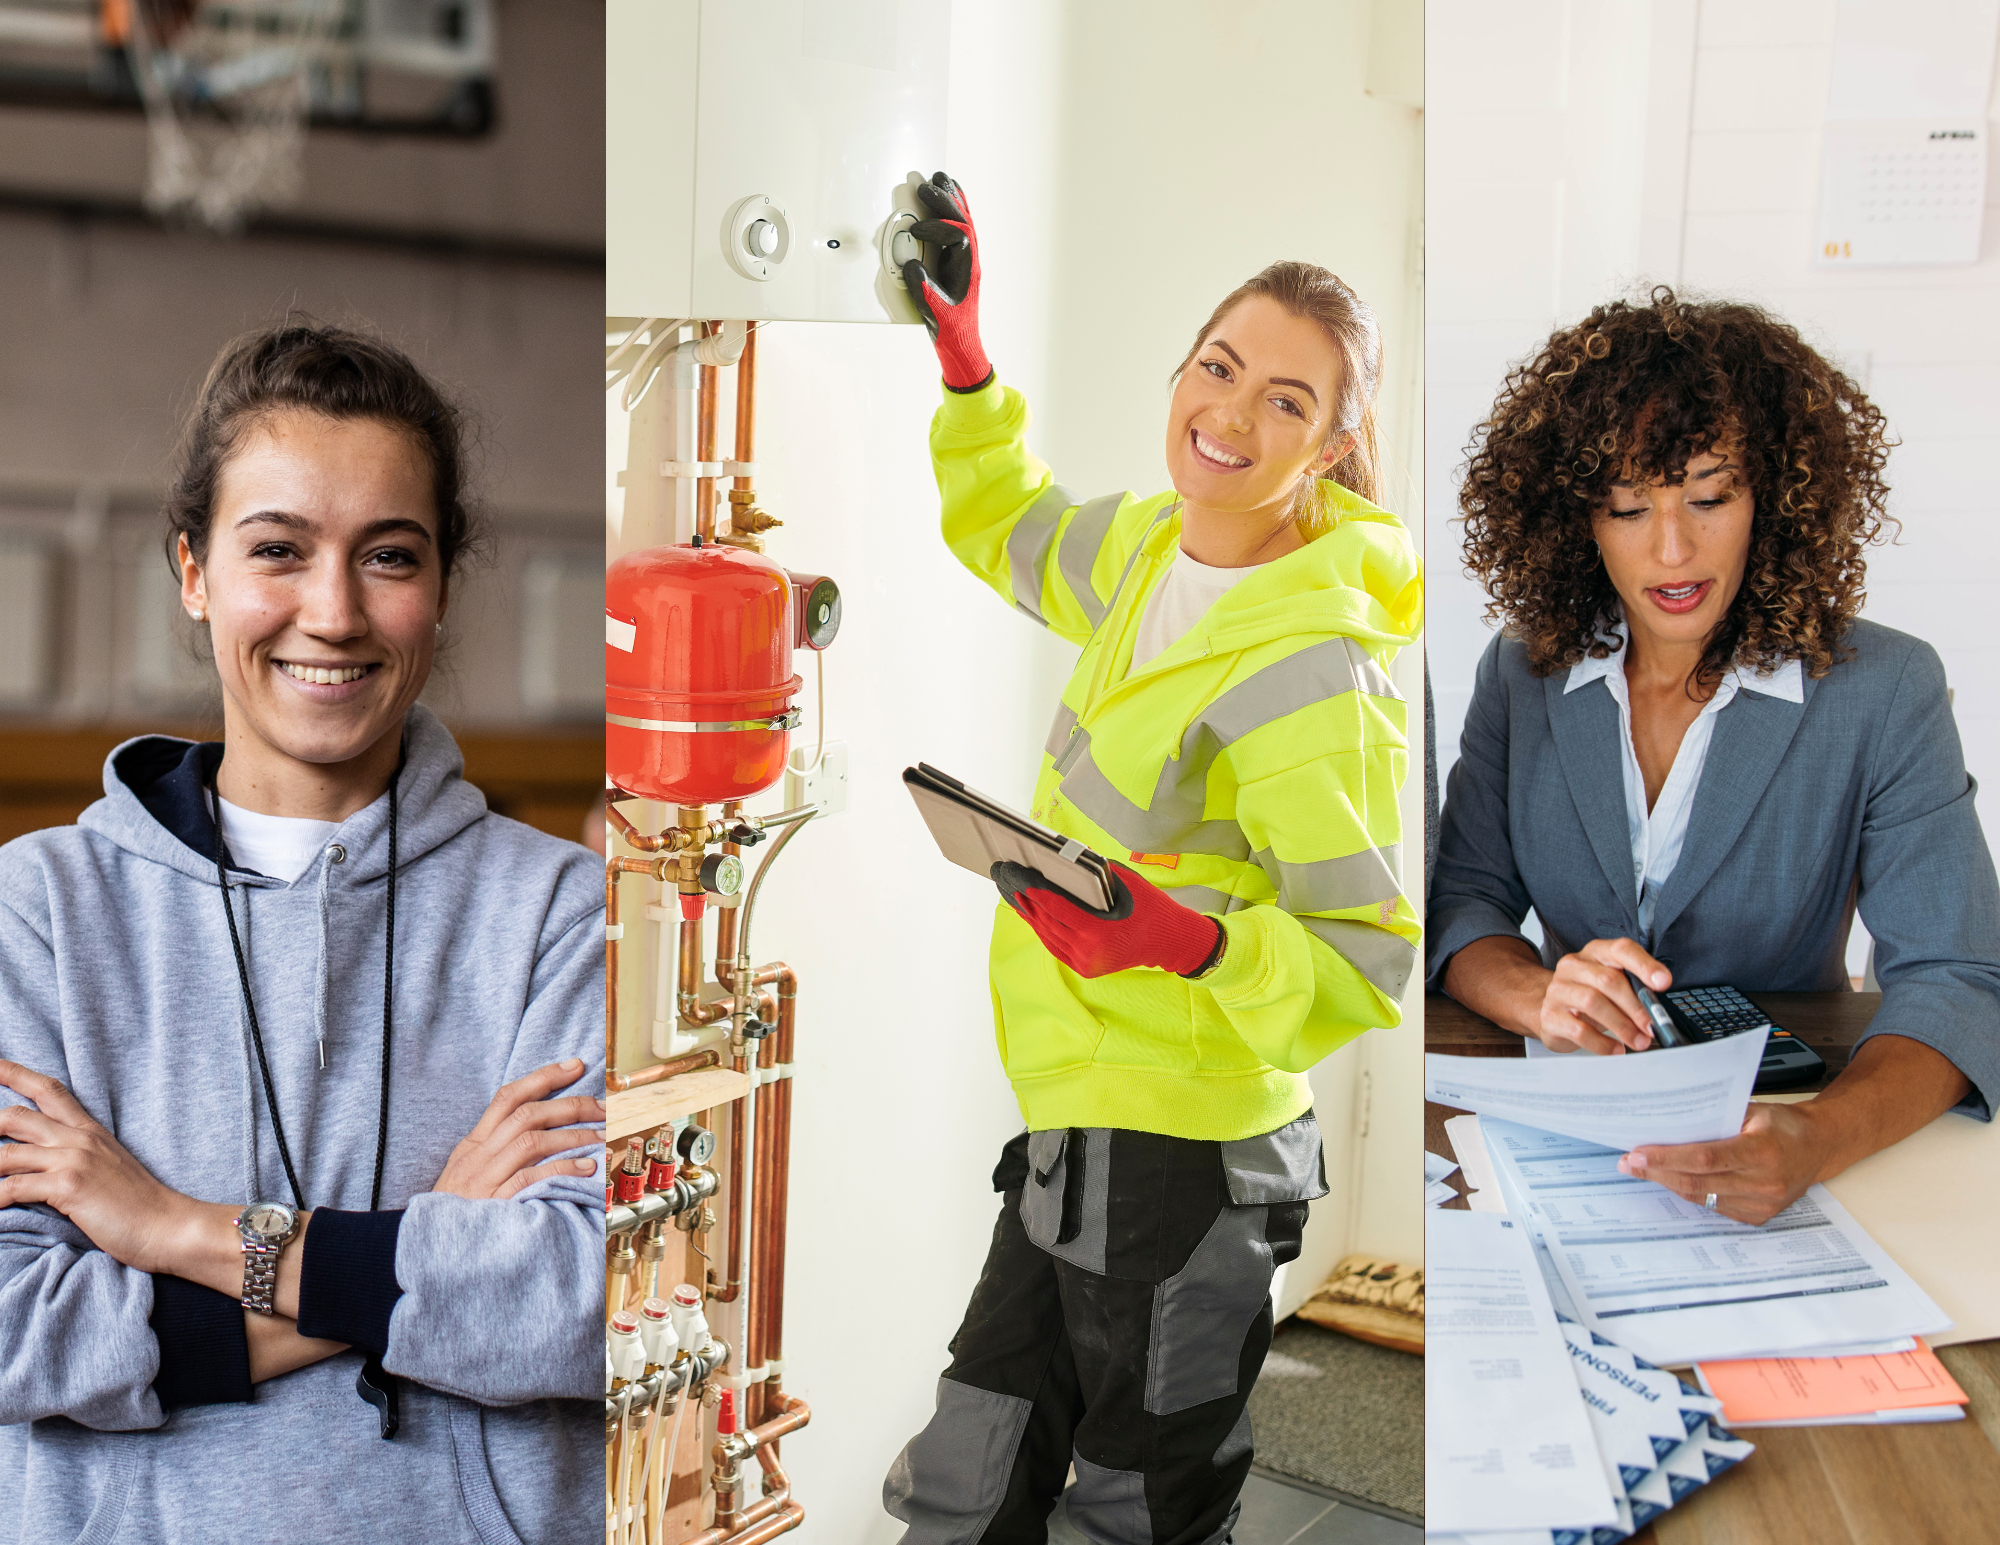 Images of women in traditionally male careers.